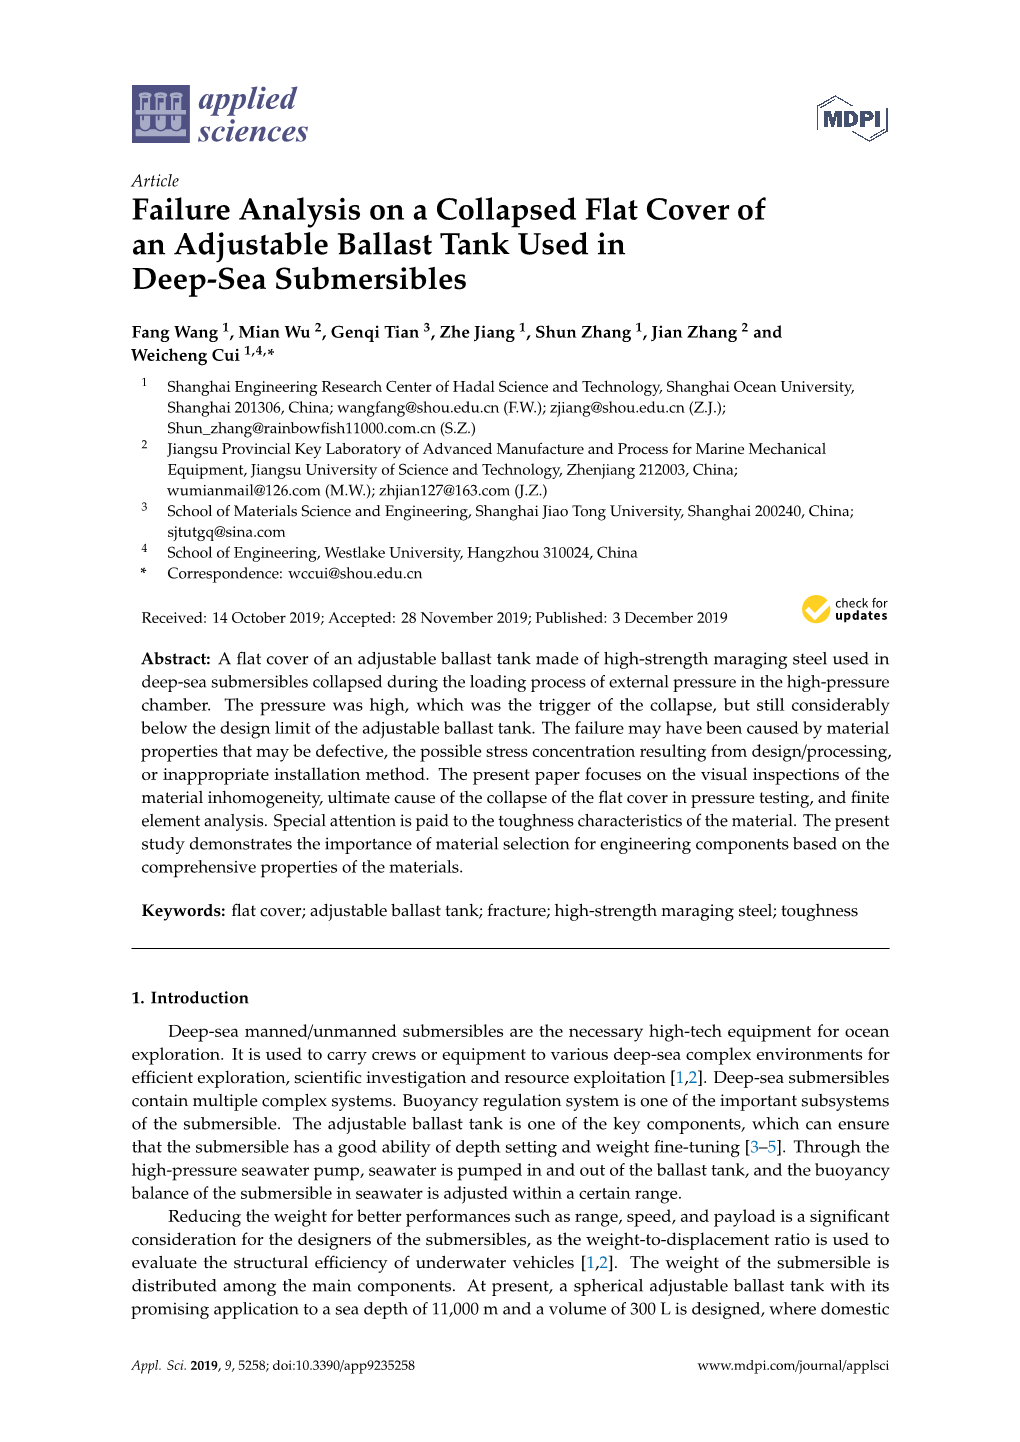 Failure Analysis on a Collapsed Flat Cover of an Adjustable Ballast Tank Used in Deep-Sea Submersibles